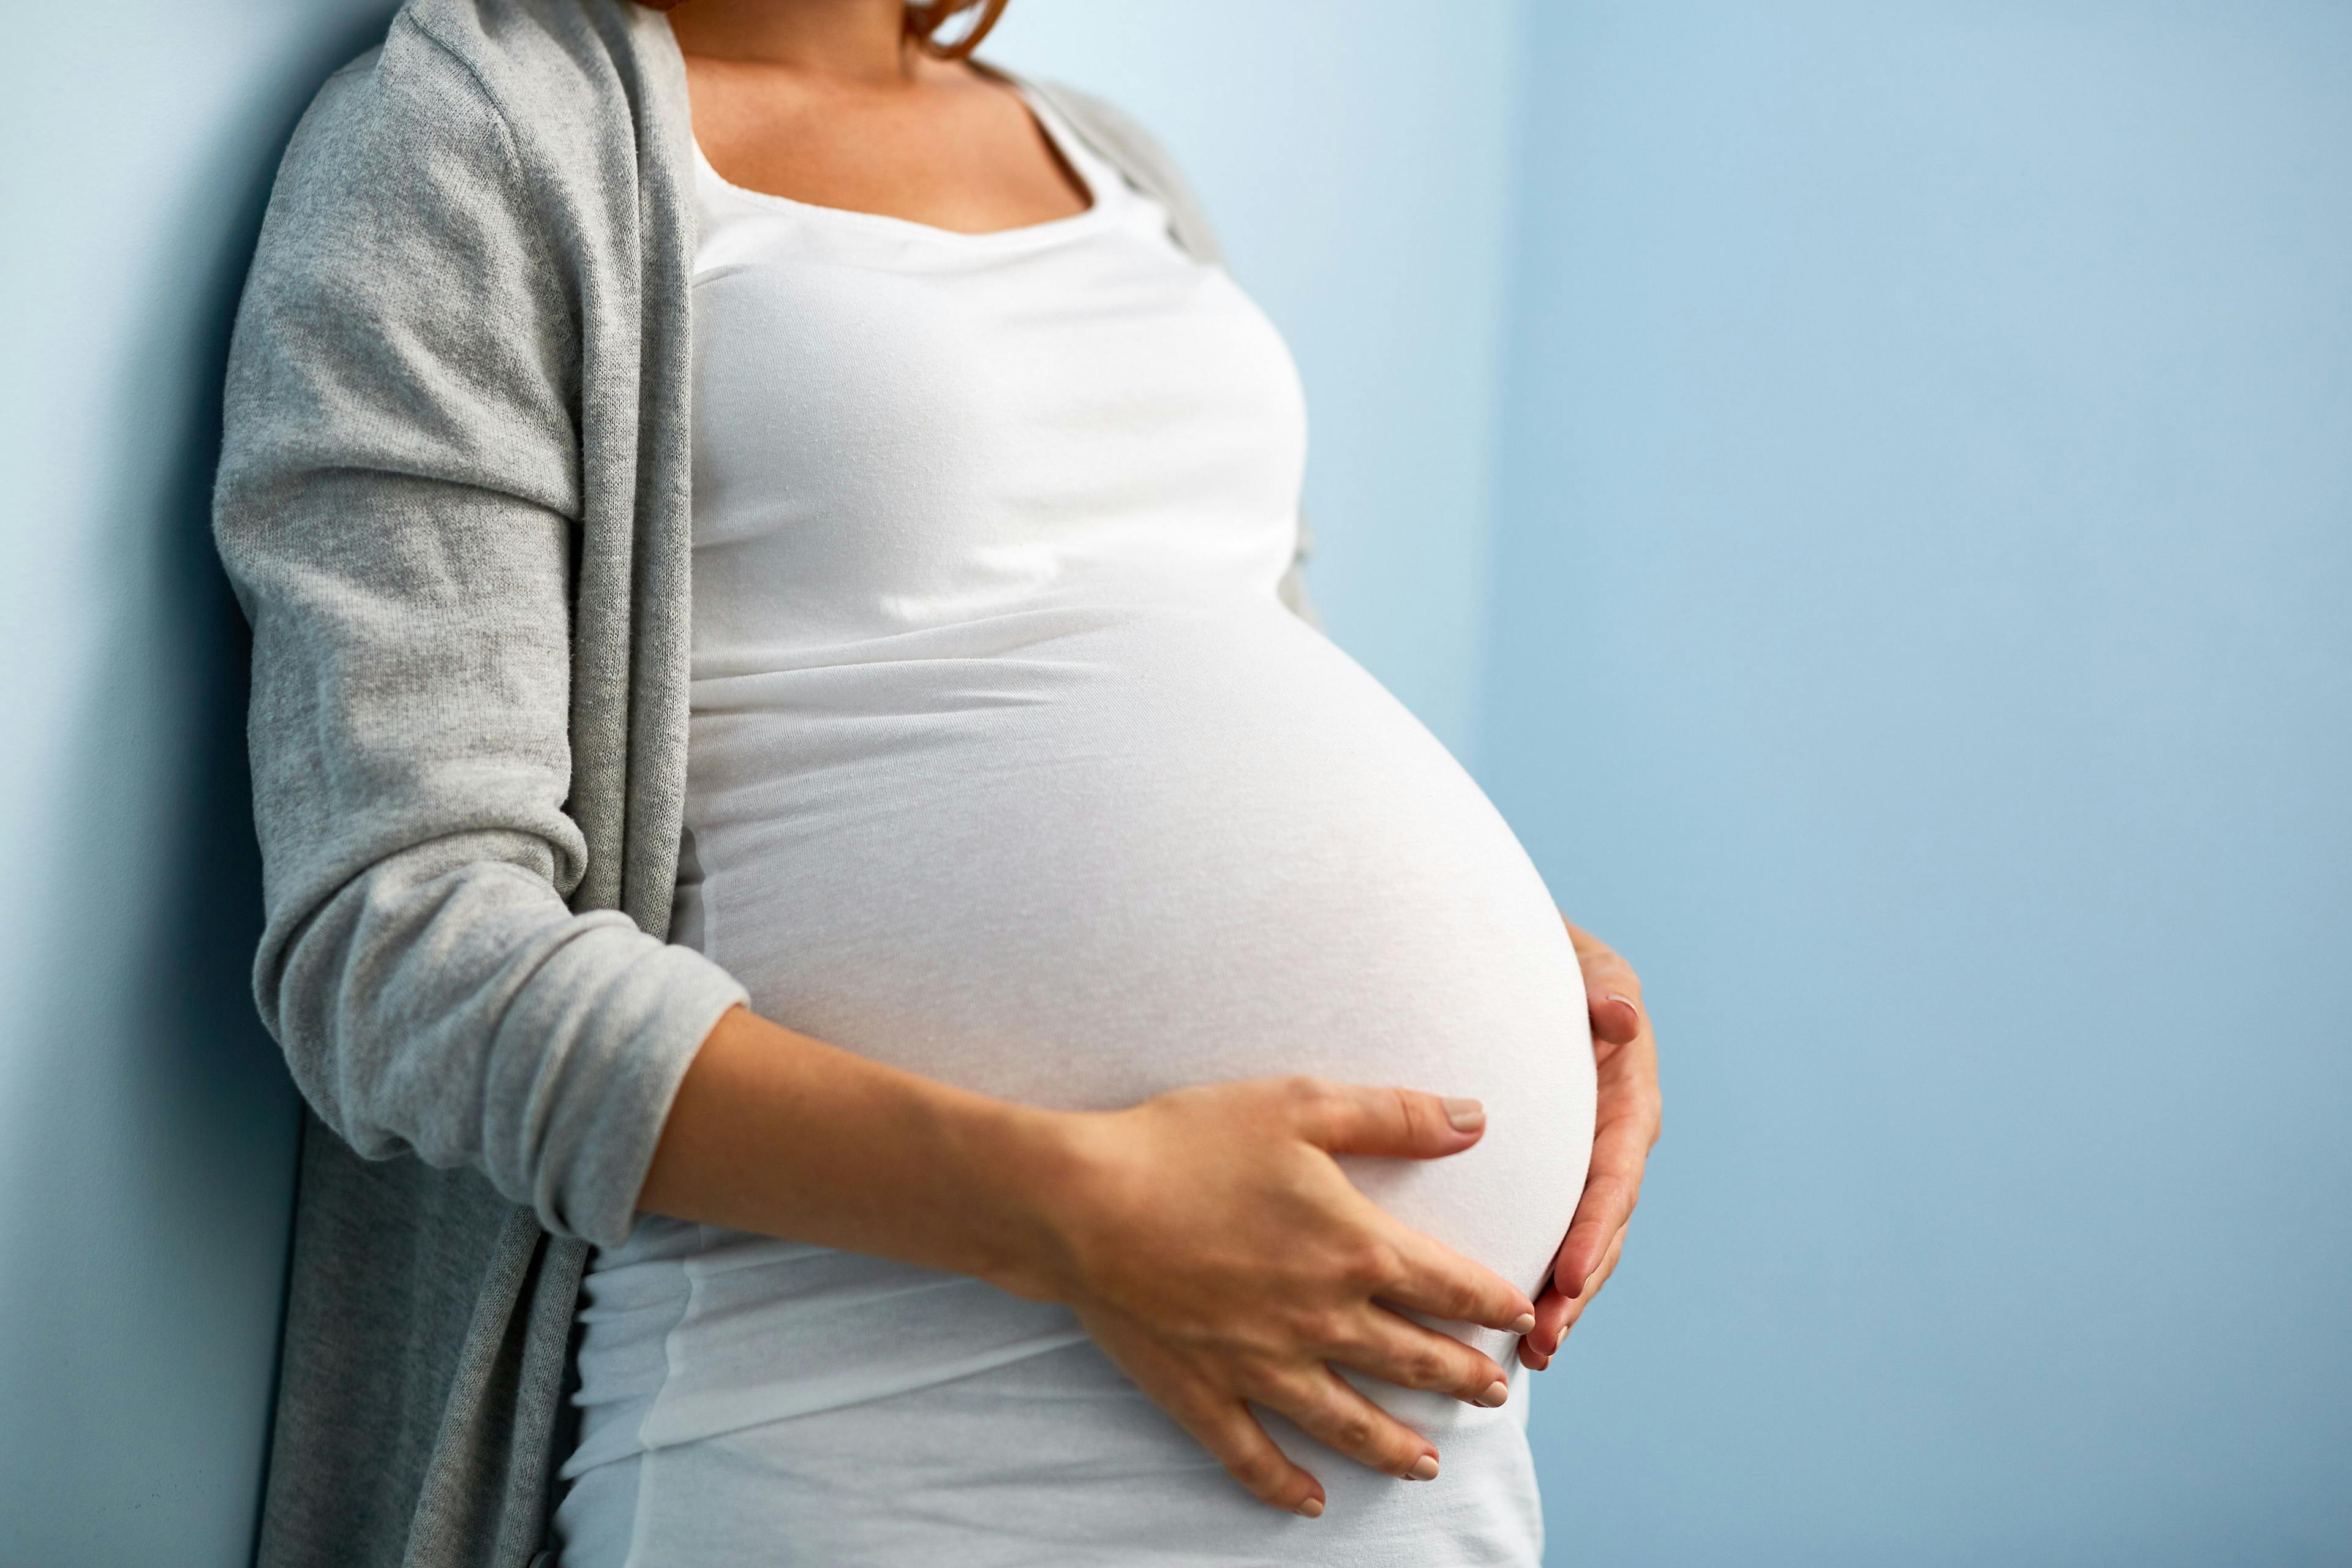 Methotrexate, Leflunomide Linked to Higher Risk of Adverse Pregnancy Outcomes in Patients With RA